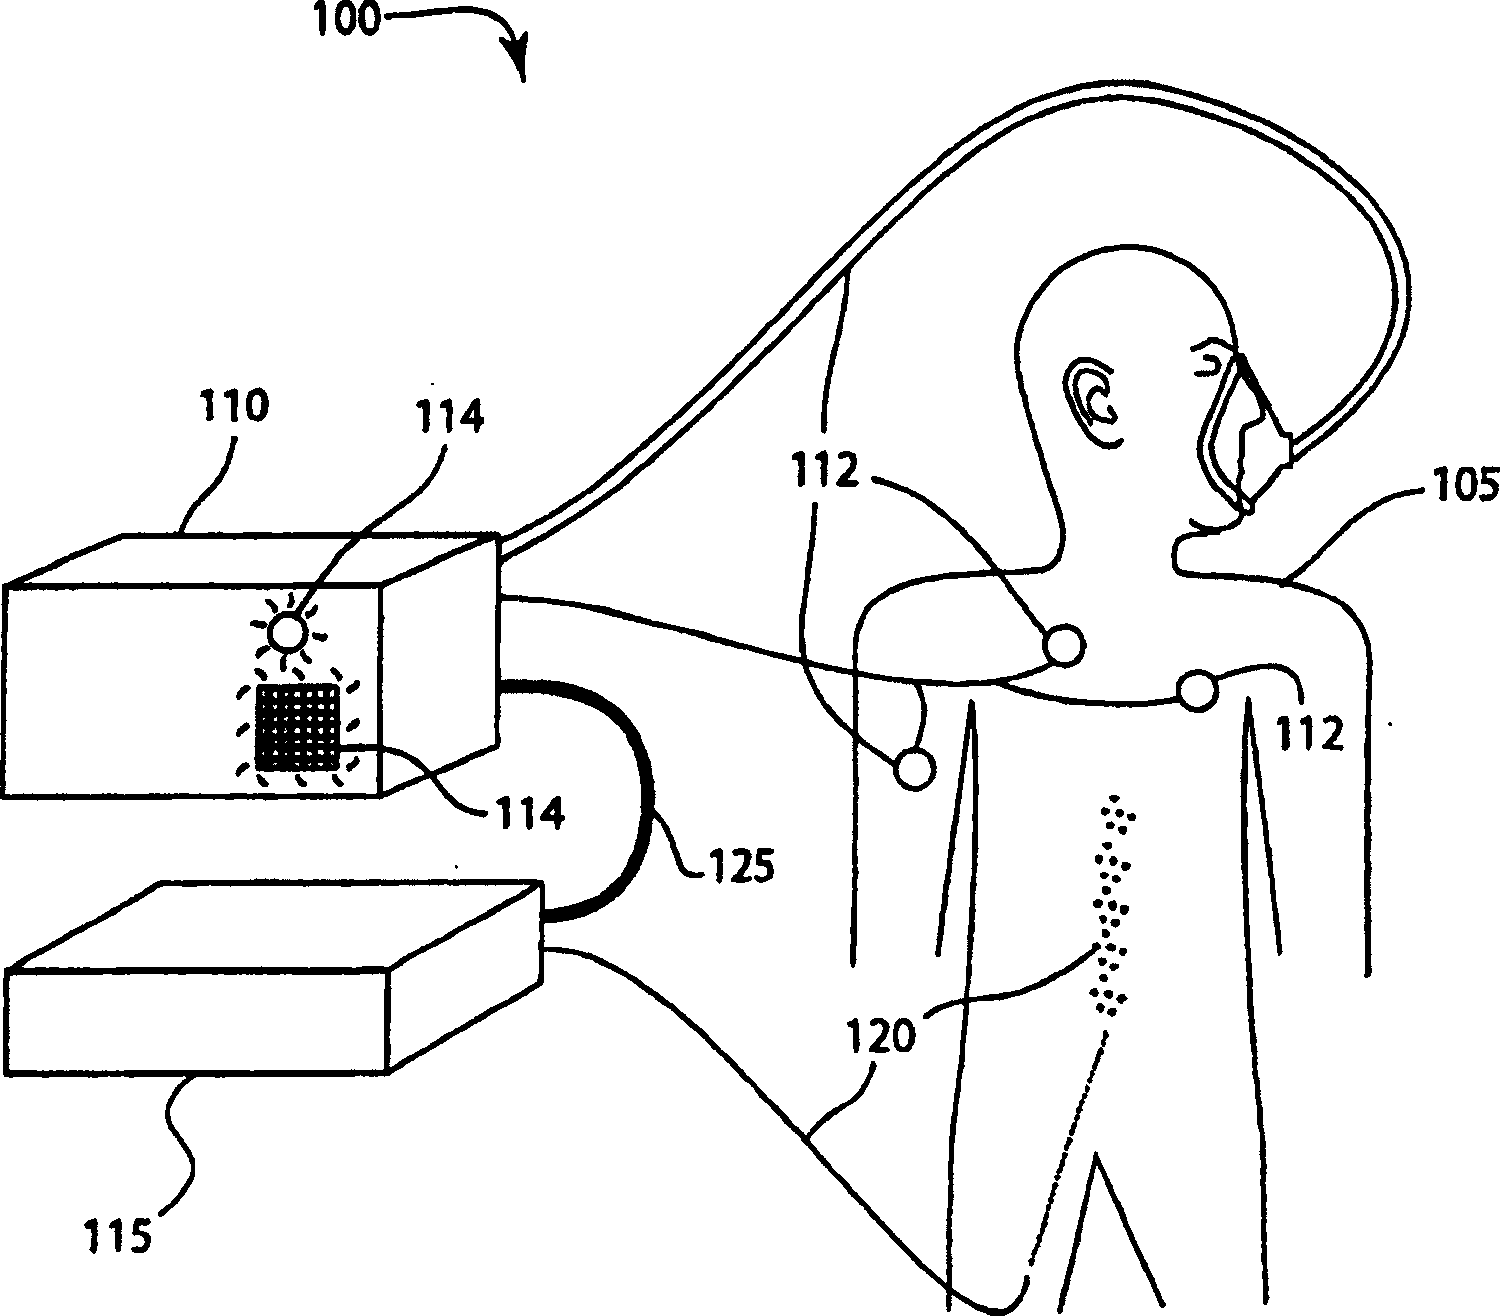 System and method of modular integration of intravascular gas exchange catheter with respiratory monitor and ventilator